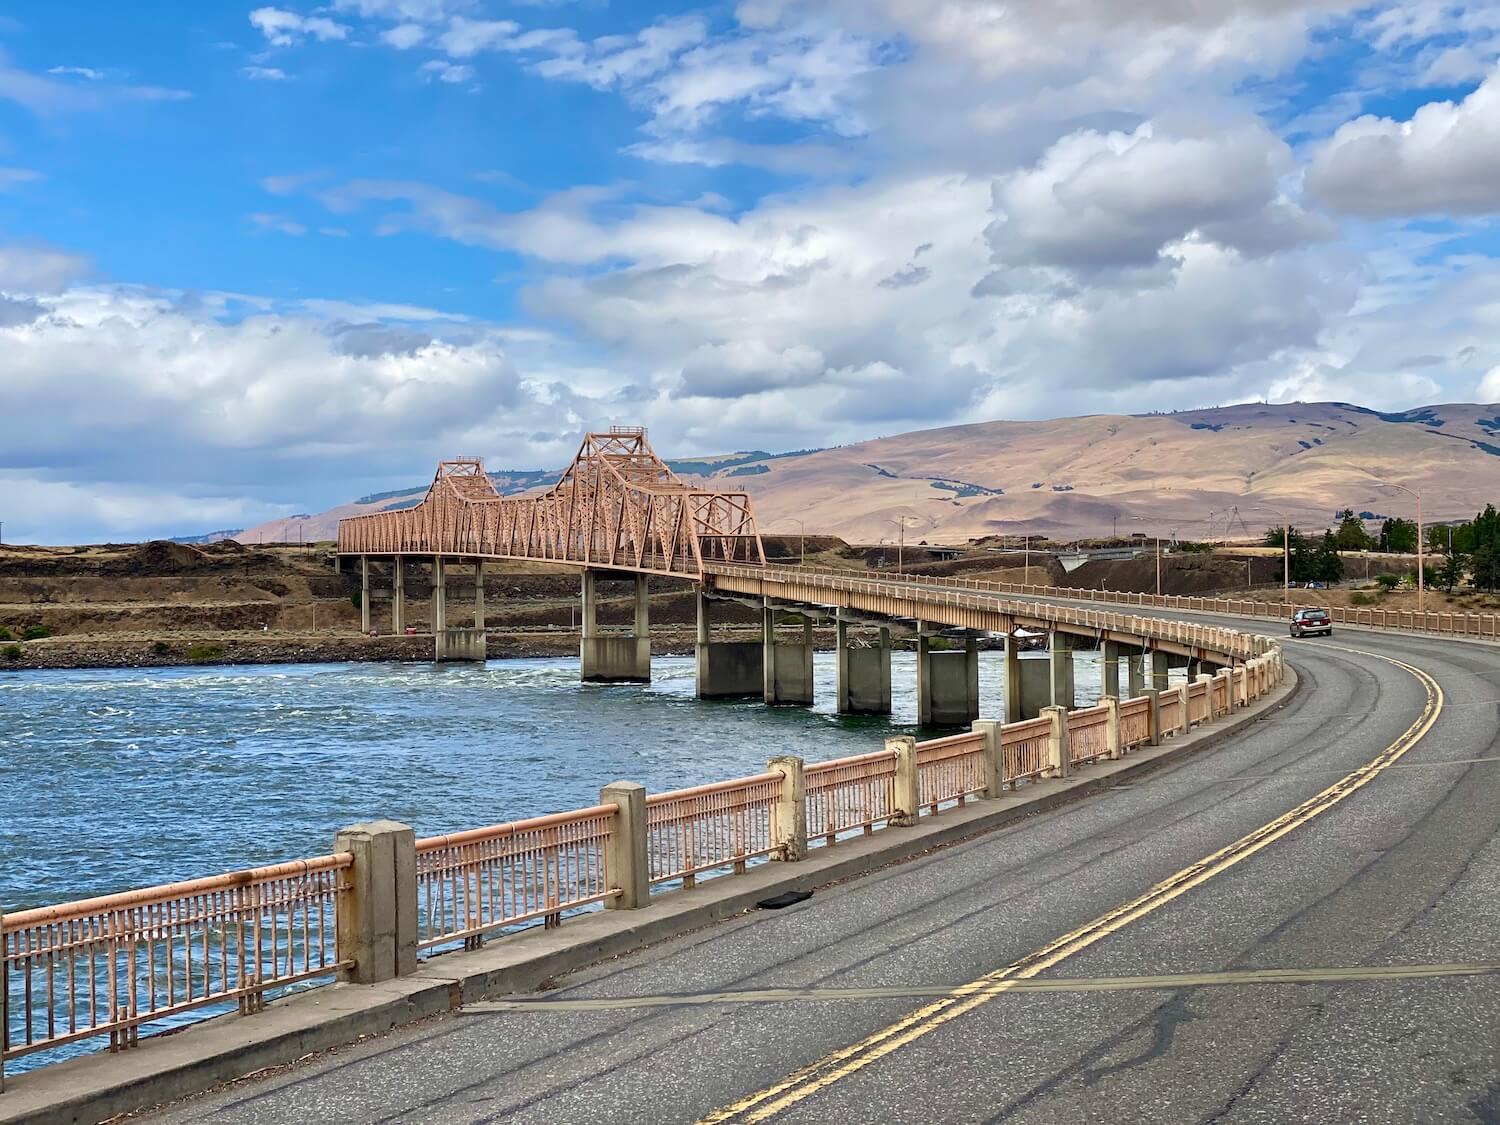 The Dalles Bridge leads from Oregon to Washington State and the pinkish metal structure crosses the Columbia River after making a curve.  